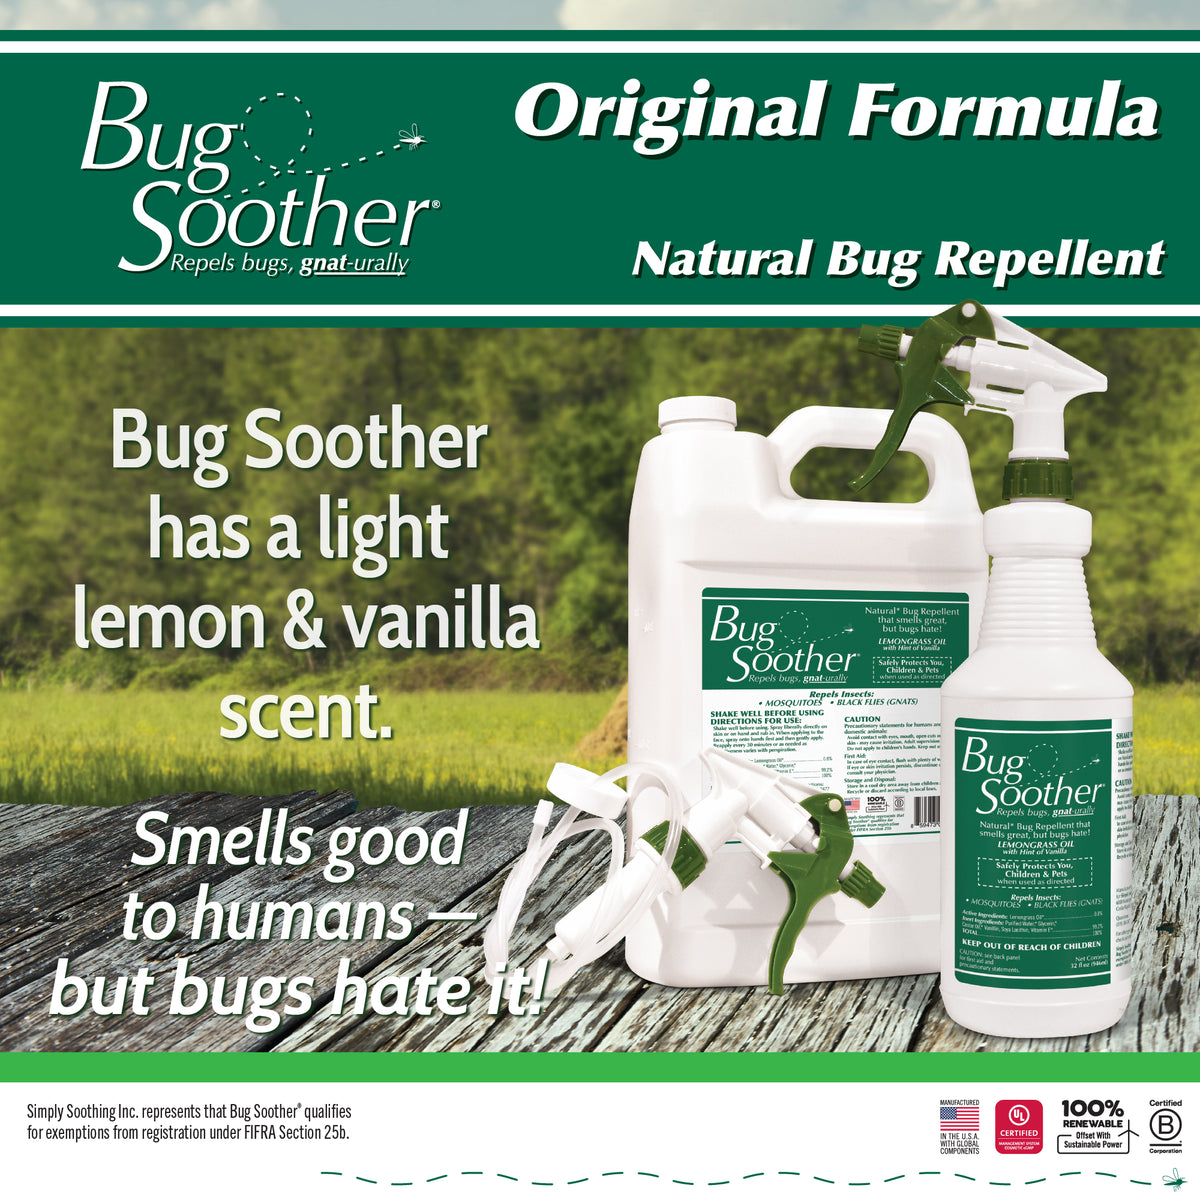 Bug Soother Insect Repellent, 1 Gallon Jug